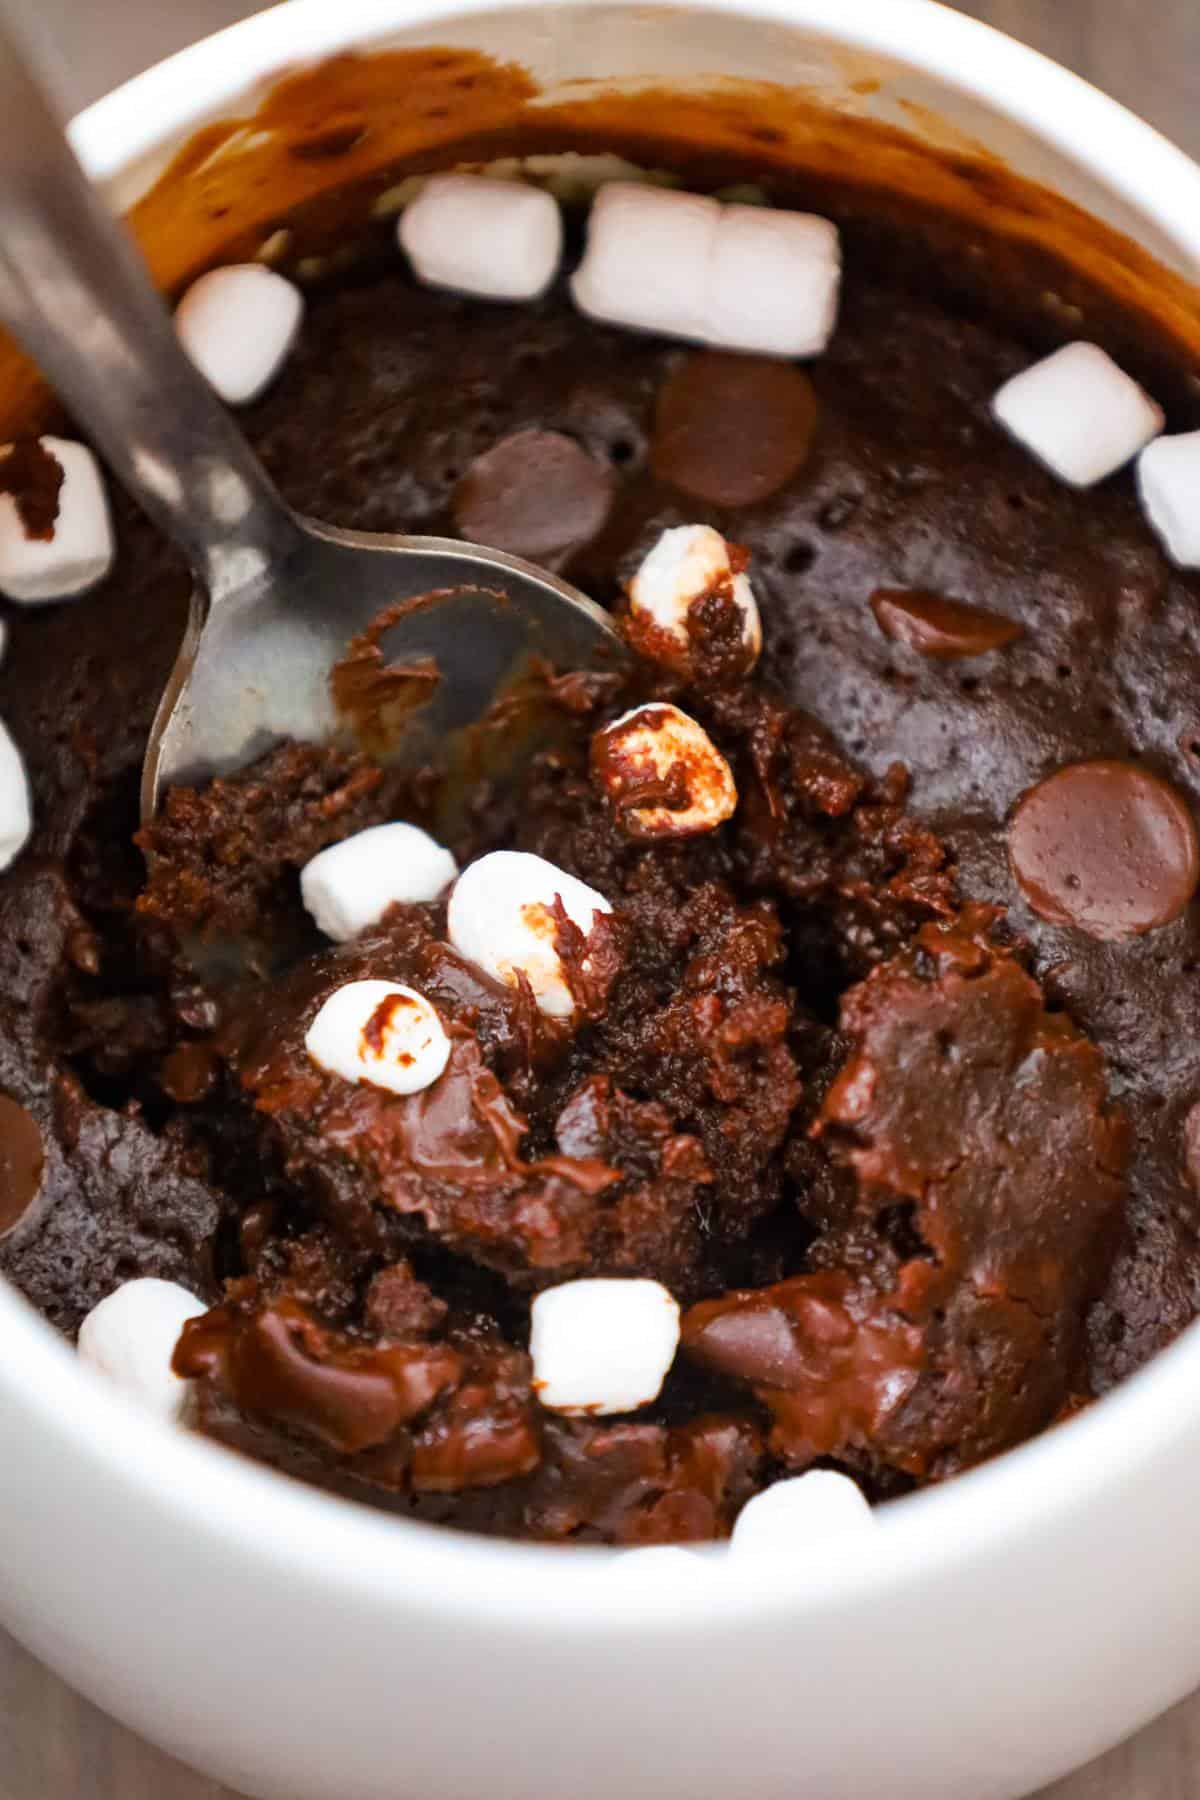 Brownie in a Mug is a simple but decadent single serve dessert recipe made in the microwave.